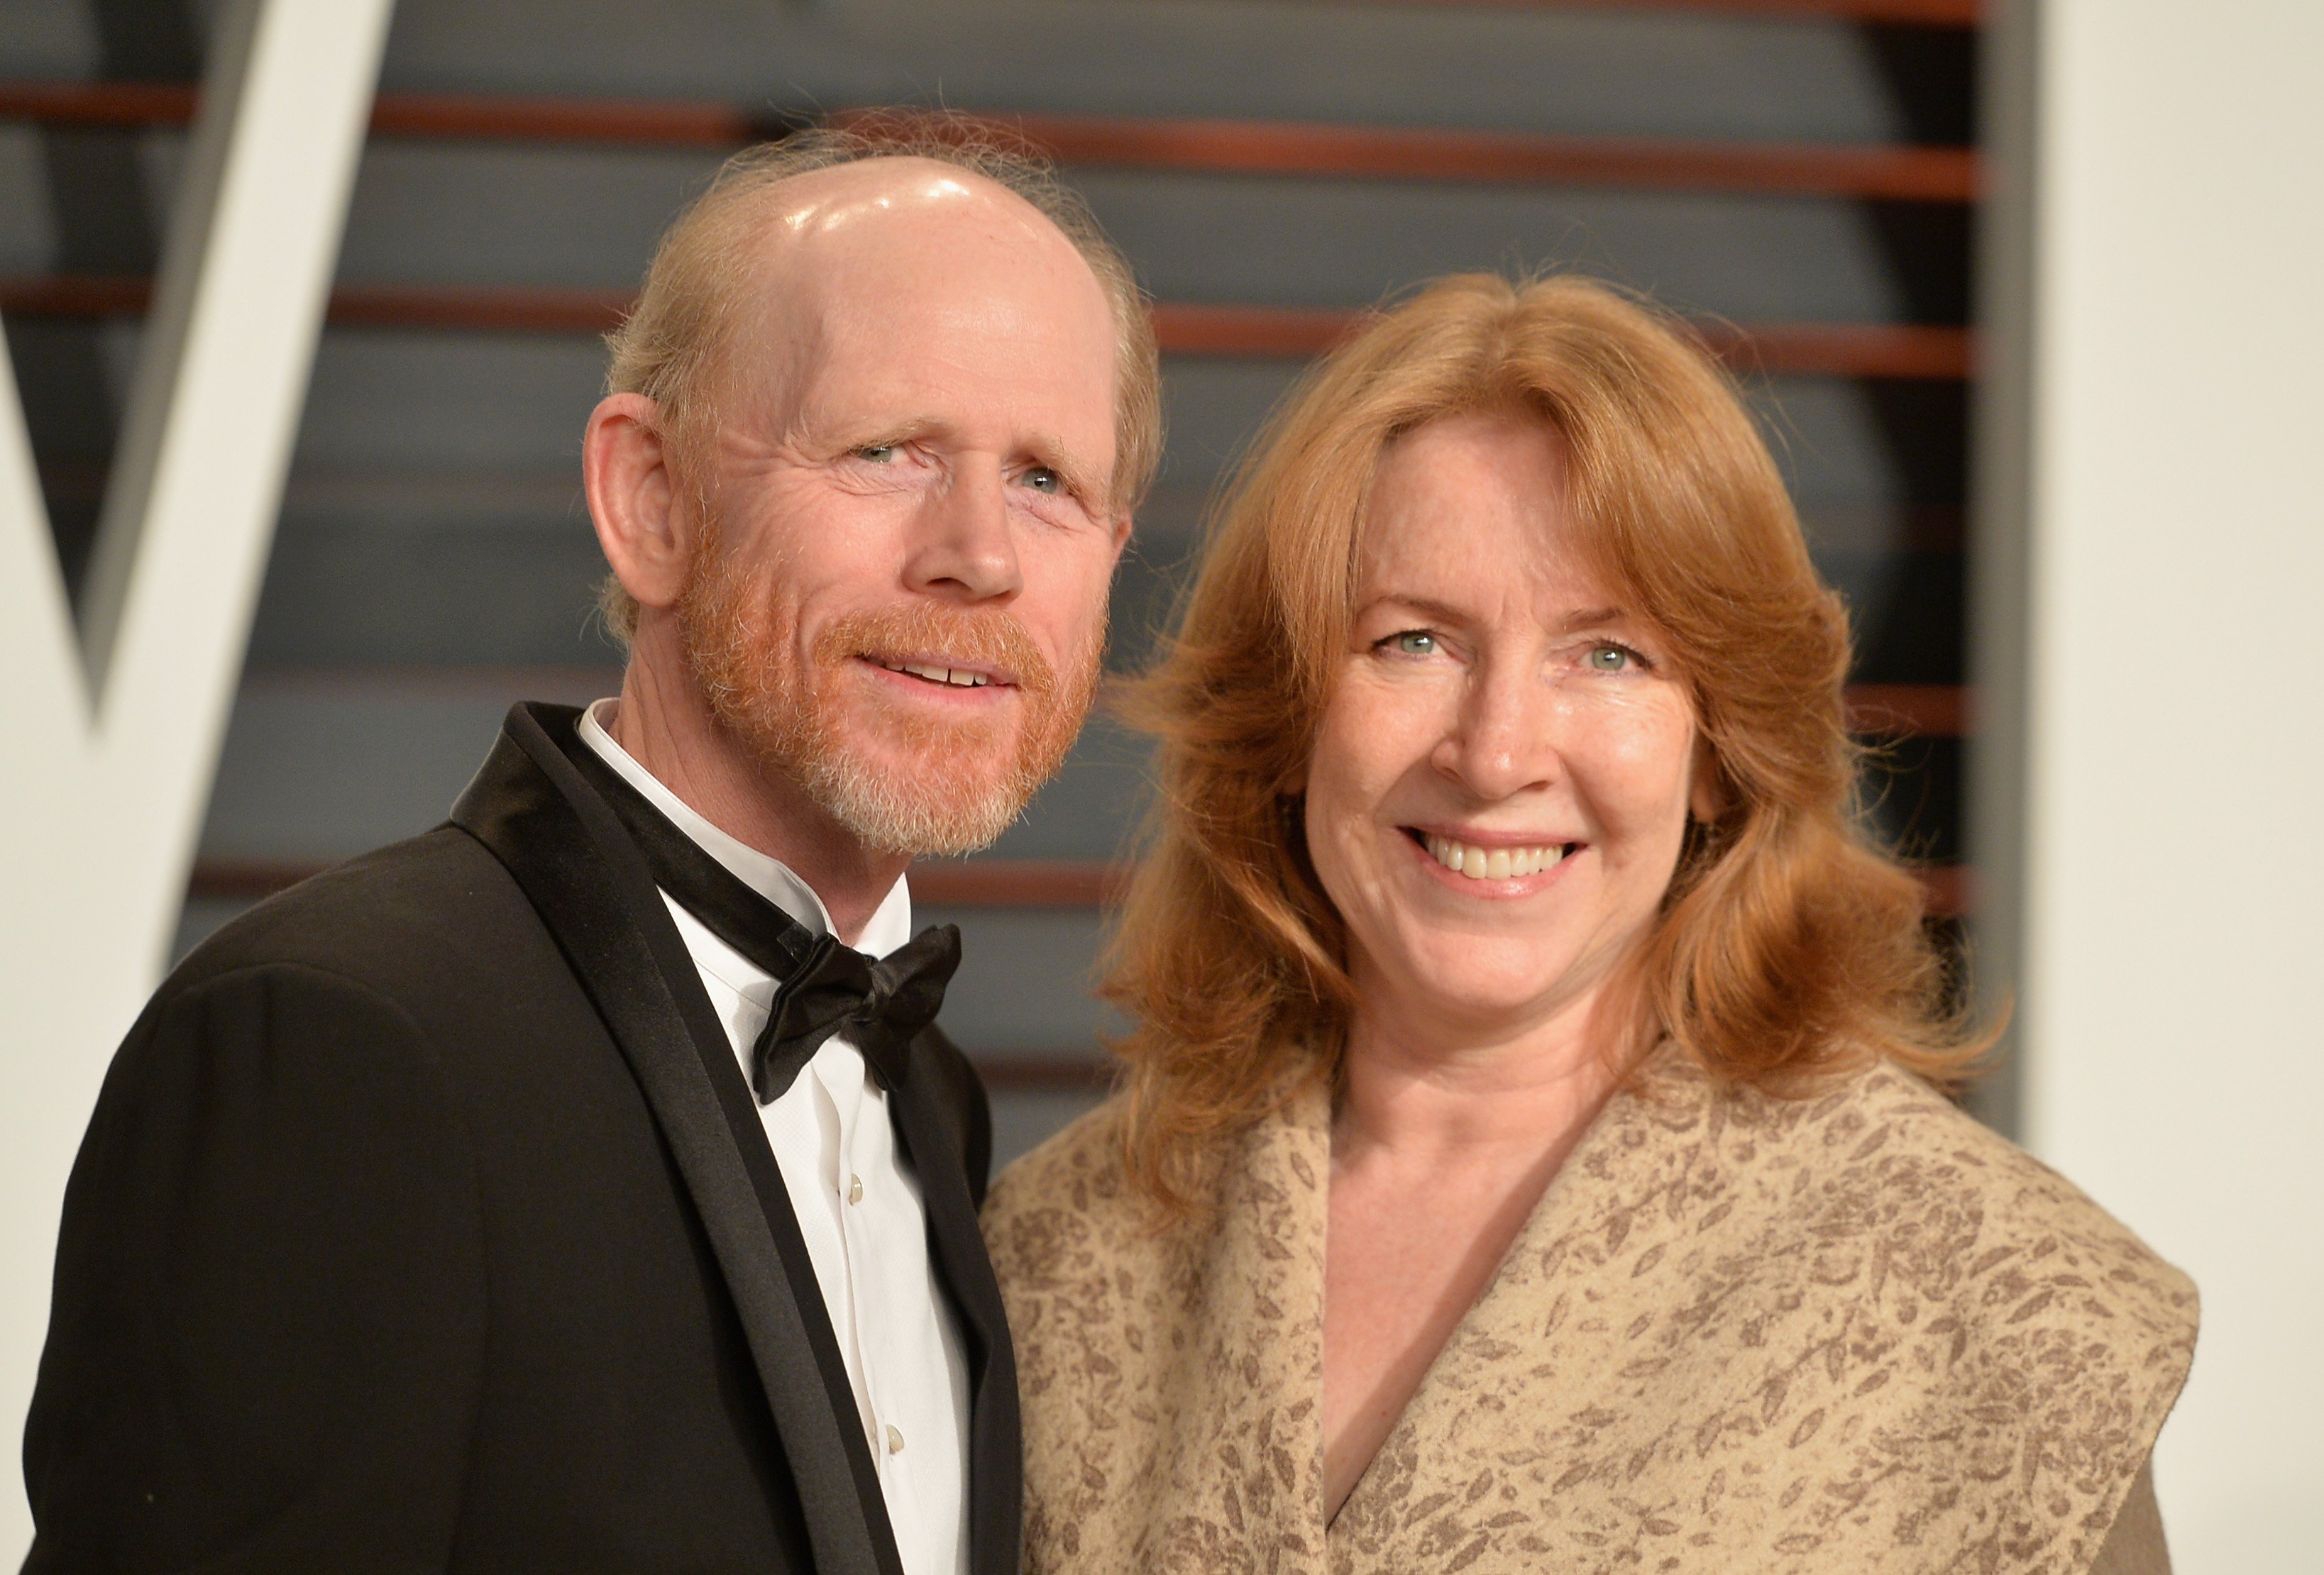 Ron Howard and actress Cheryl Howard attend the 2015 Vanity Fair Oscar Party hosted by Graydon Carter at Wallis Annenberg Center for the Performing Arts on February 22, 2015, in Beverly Hills, California. | Source: Getty Images